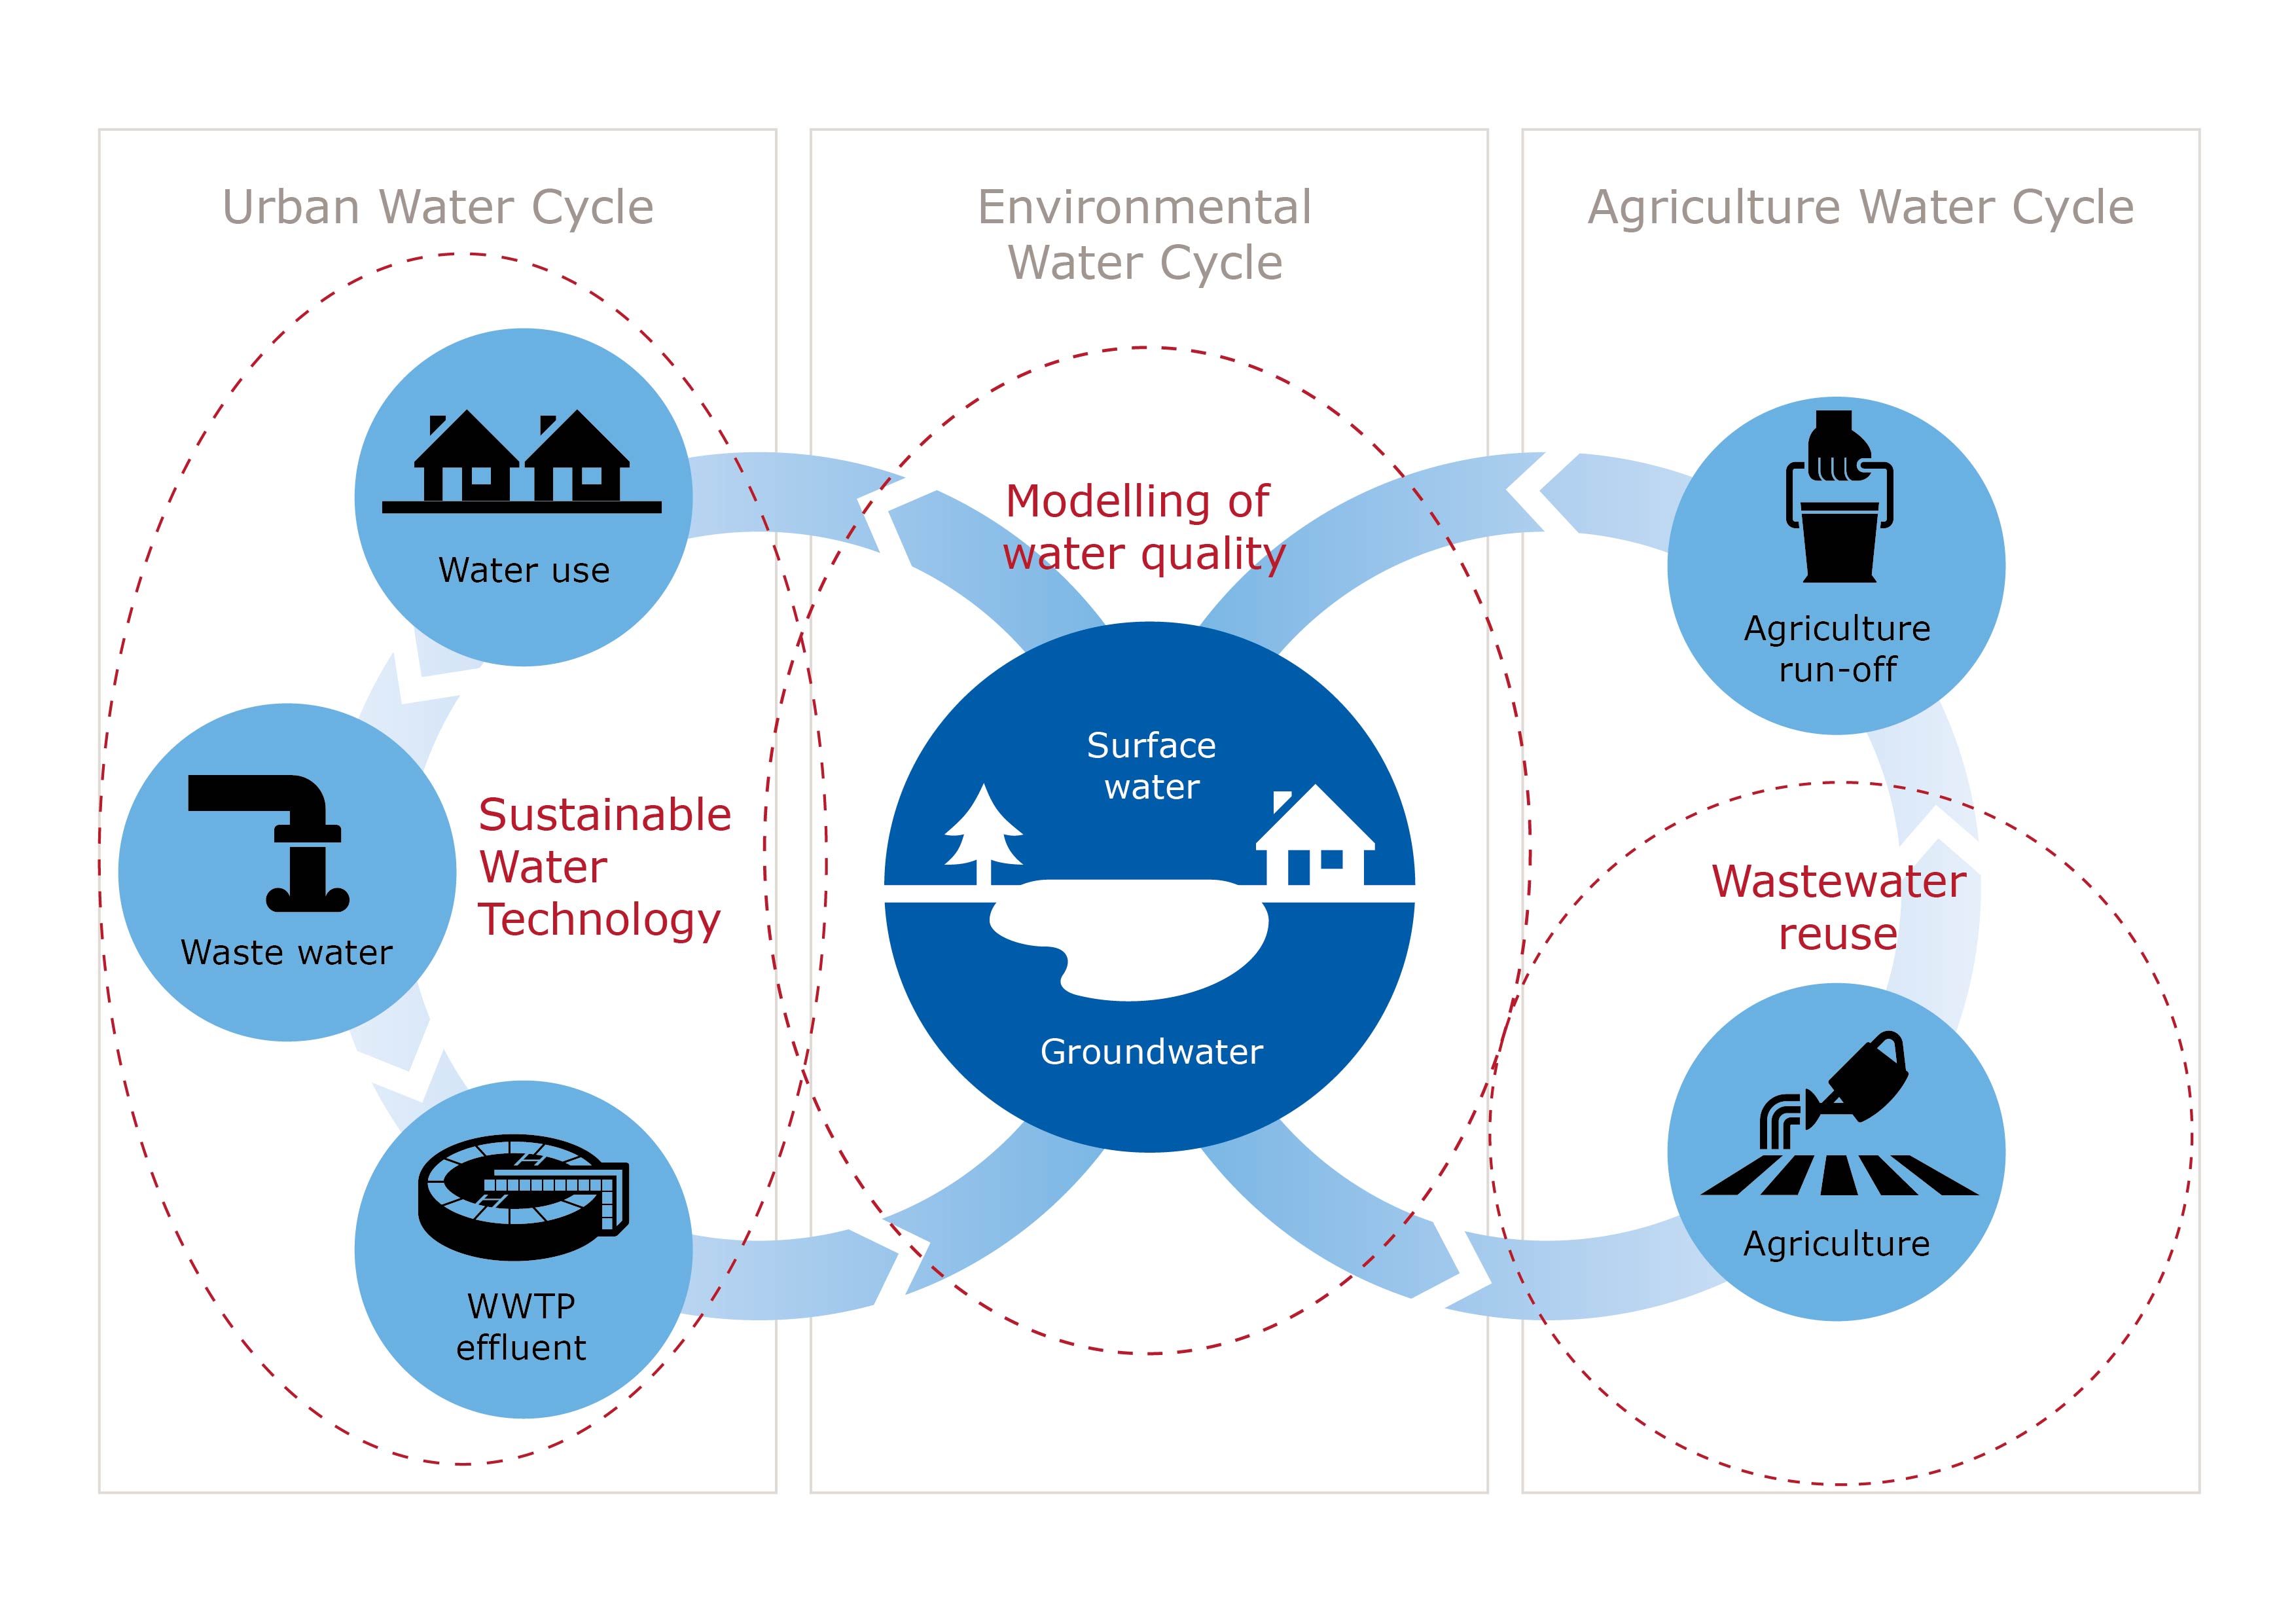 Water links urban areas, the environment, and agriculture. Circular water systems require high quality water to fit urban, environmental and agricultural needs. At WIMEK, we work on ensuring water quality throughout the water cycle. We engineer sustainable water technologies, model water quality, and facilitate wastewater reuse in agriculture. Our research on water quality thus contributes to circular water systems. Illustration by Communication Services.